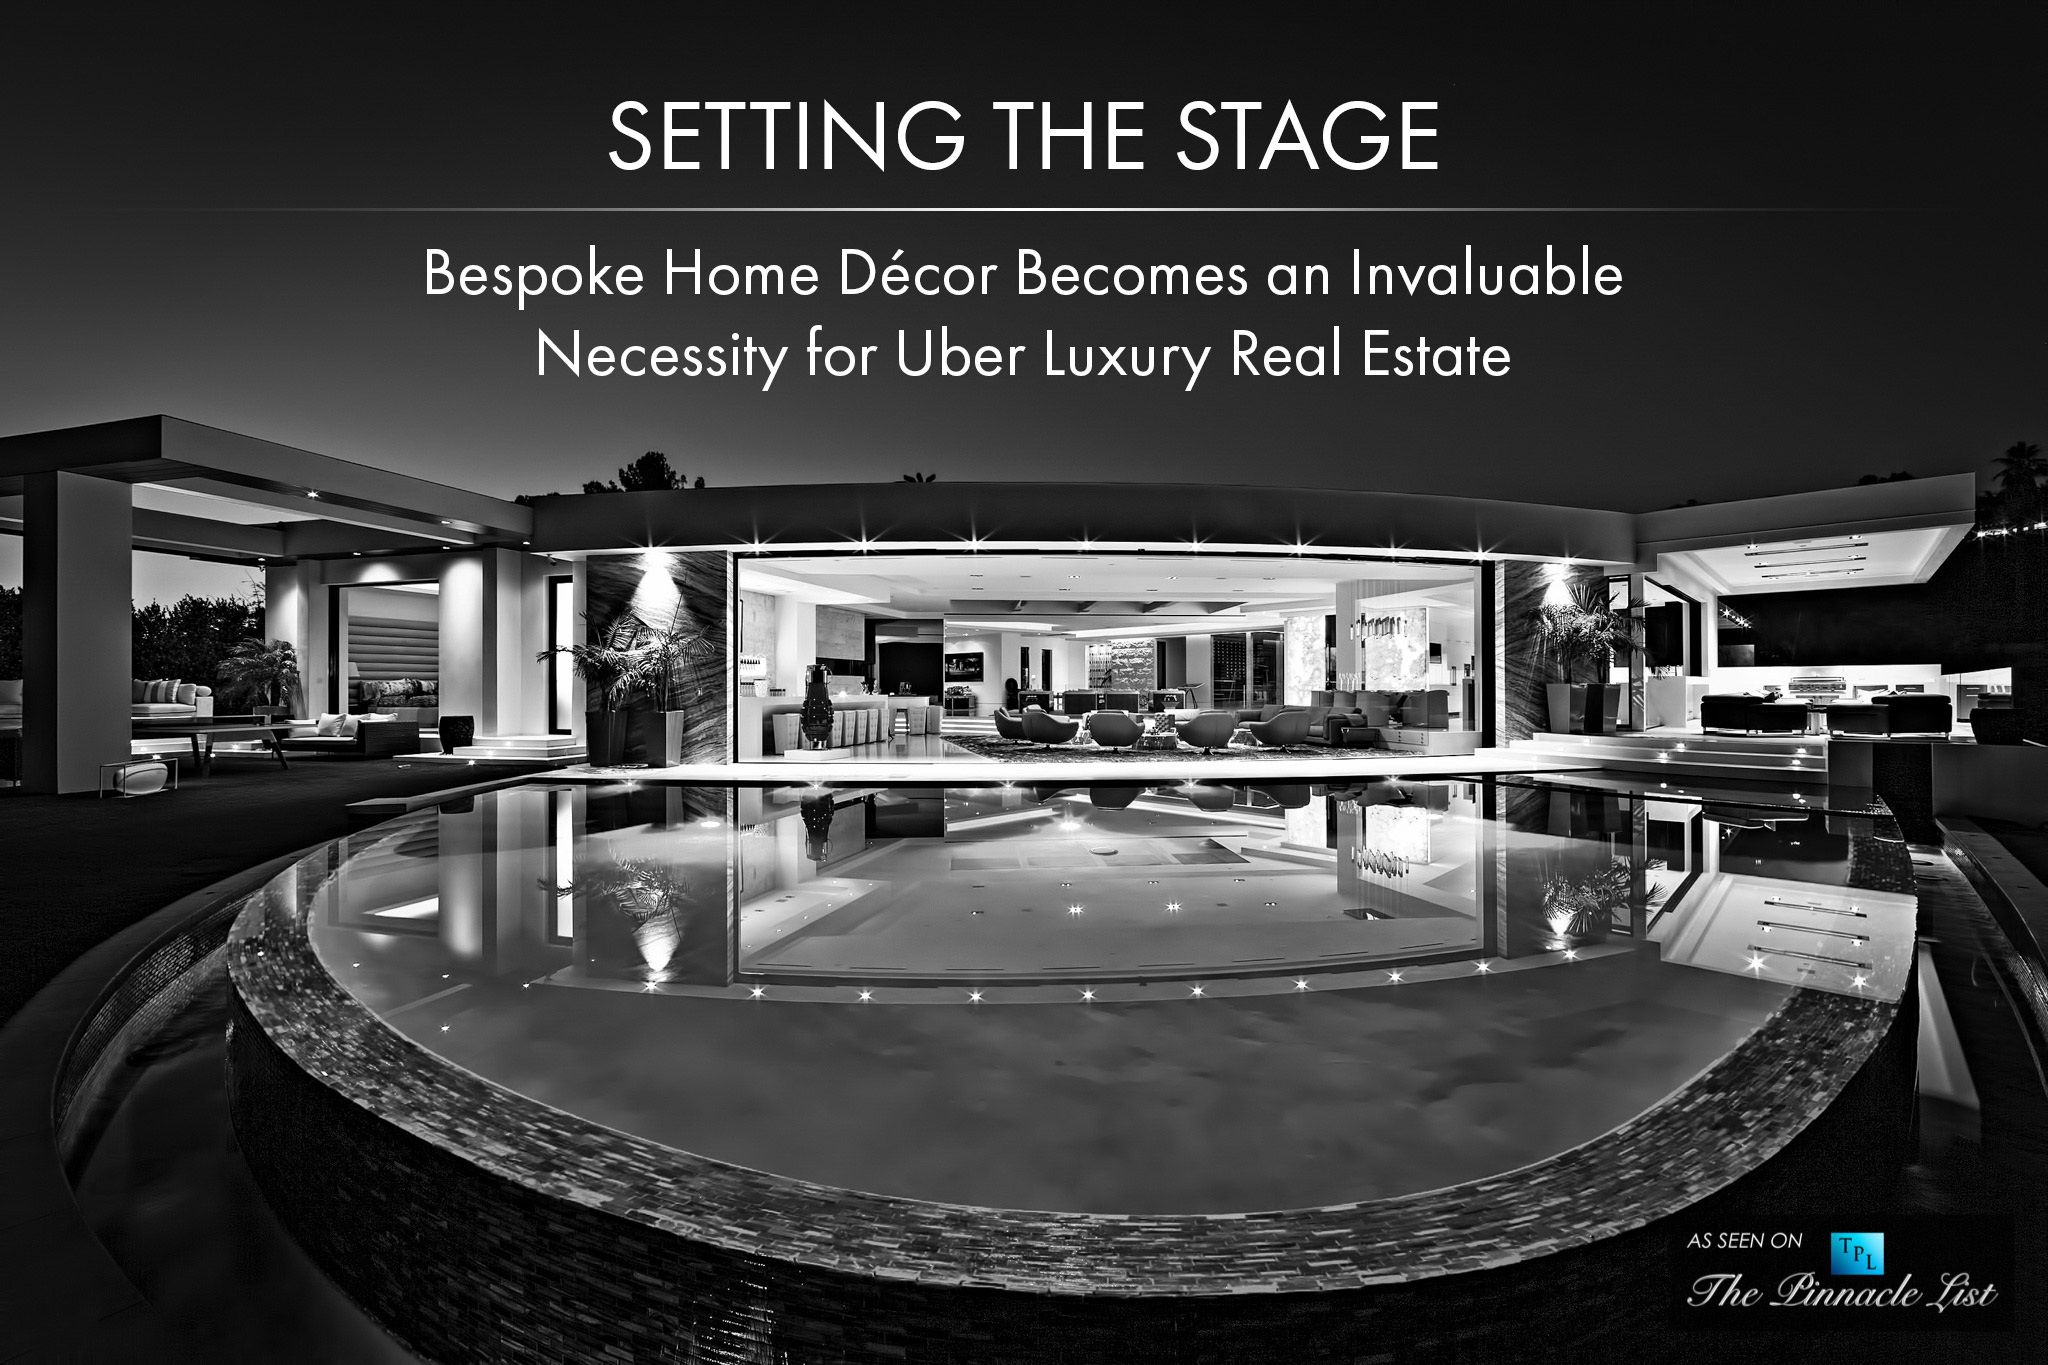 Setting the Stage - Bespoke Home Decor Becomes an Invaluable Necessity for Uber Luxury Real Estate